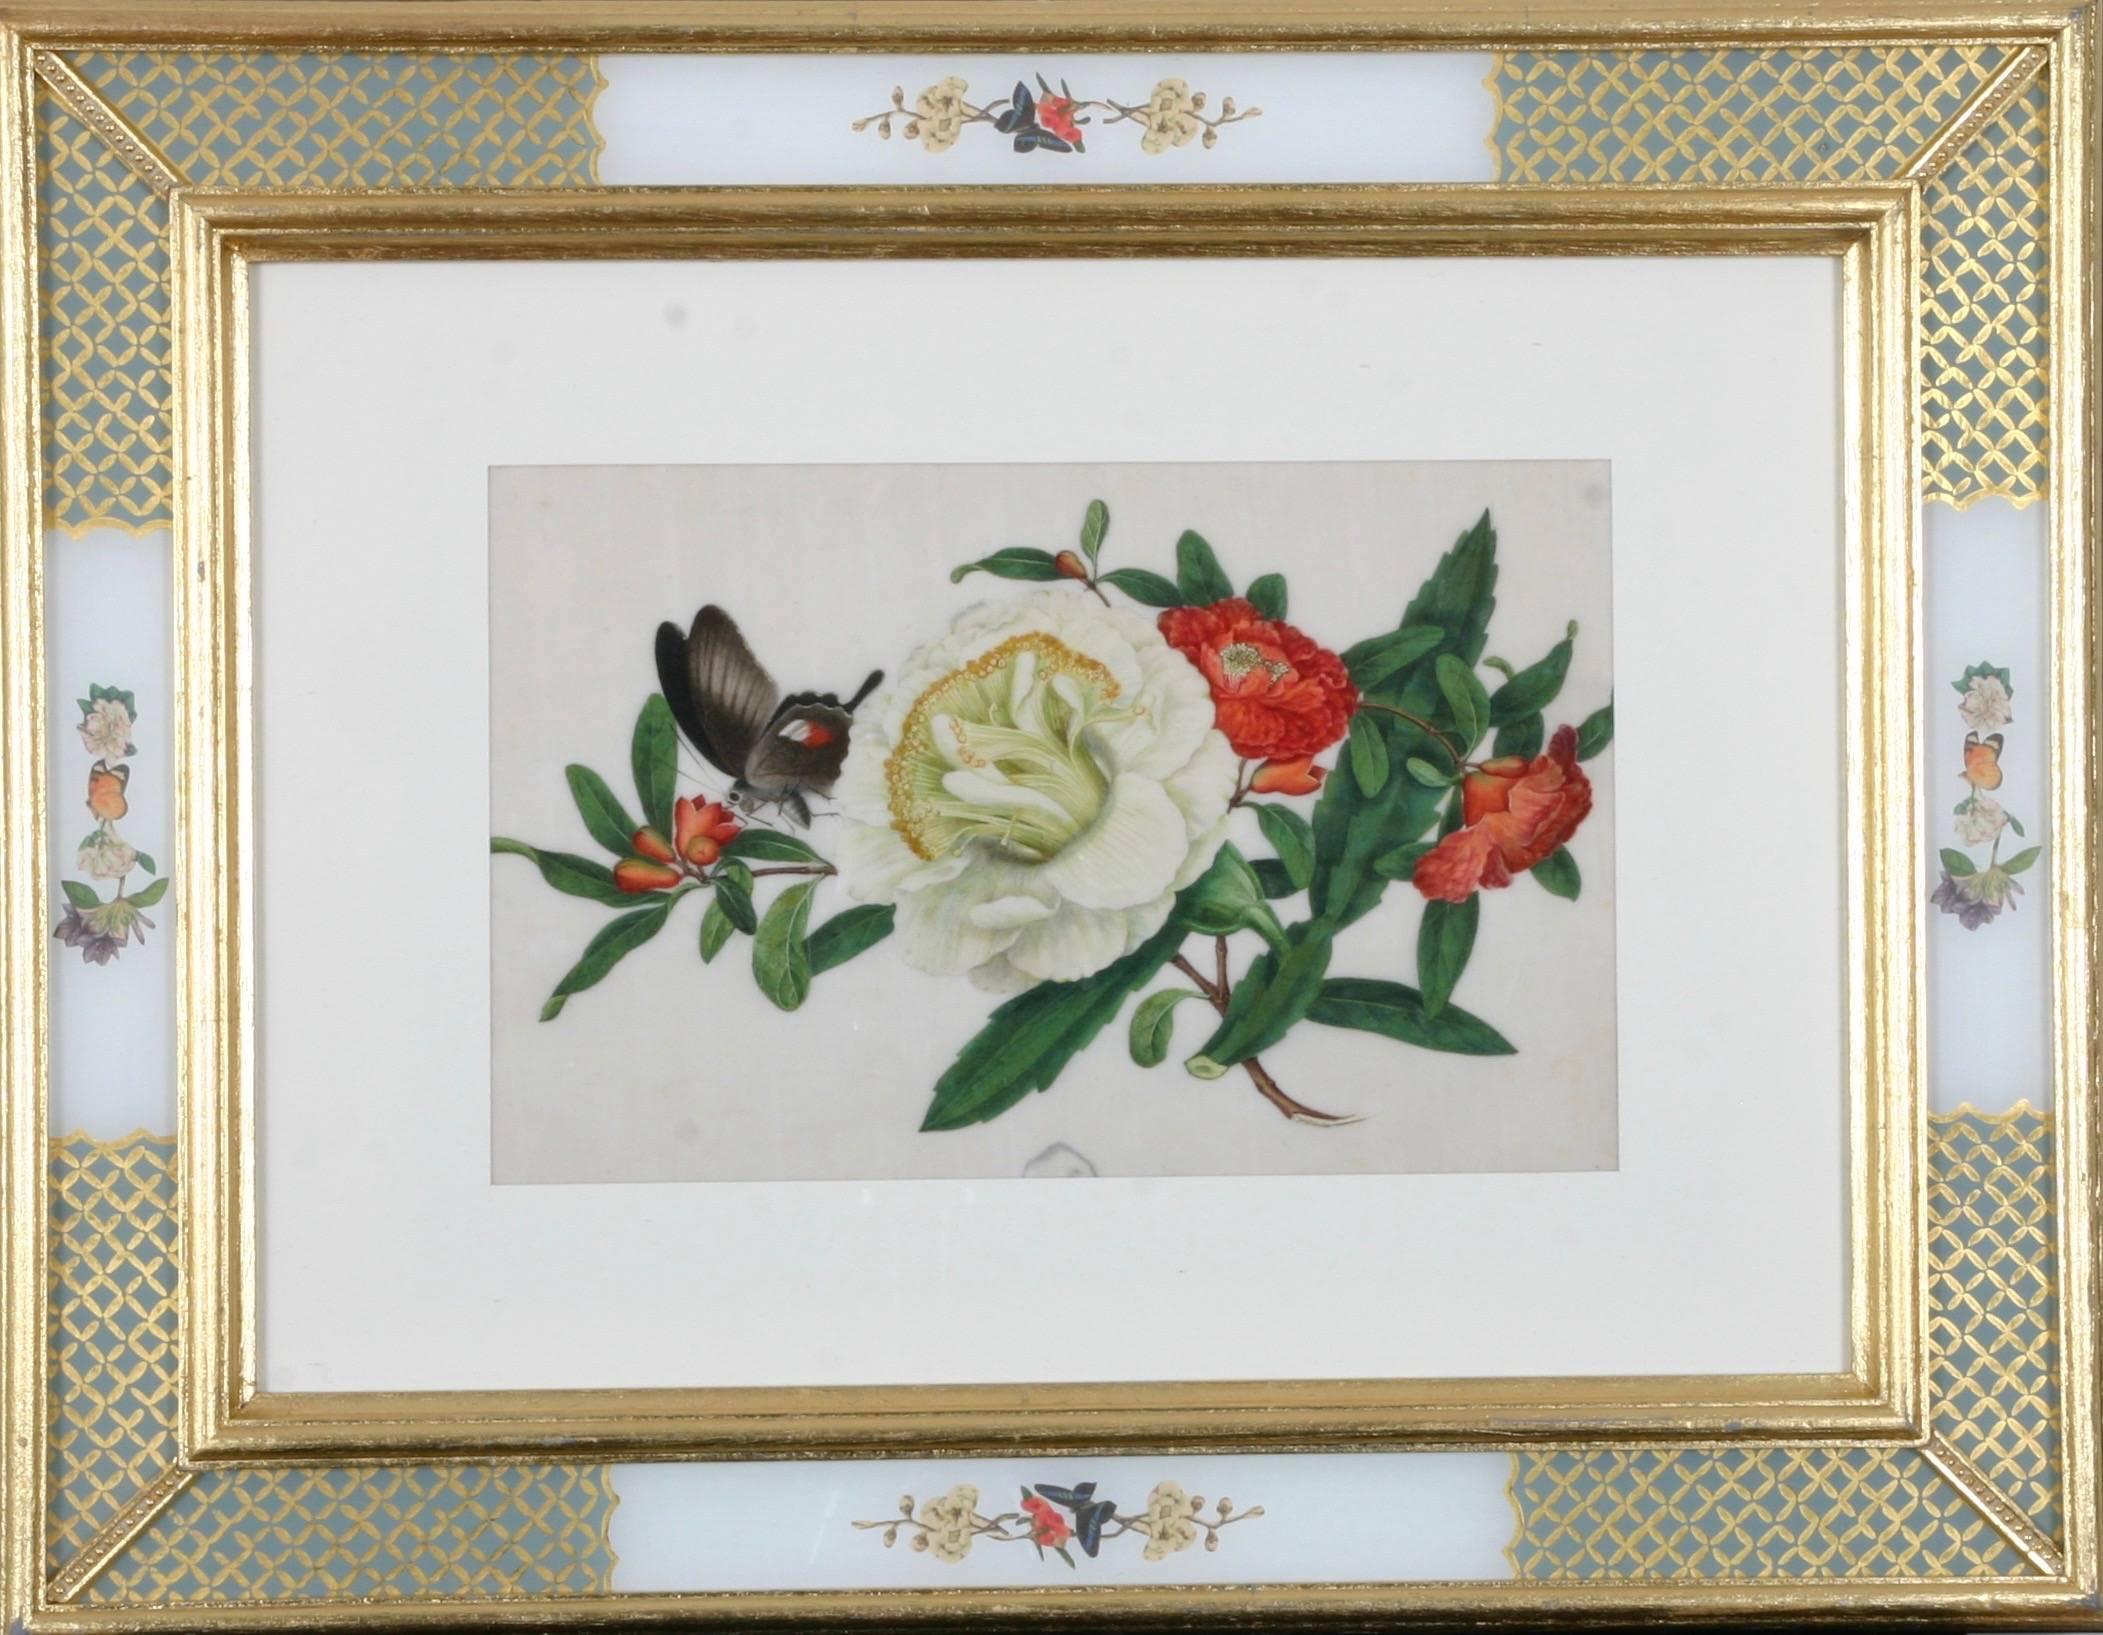 Chinese Export paintings of flowers and fruit on pith paper - Art by Sunqua